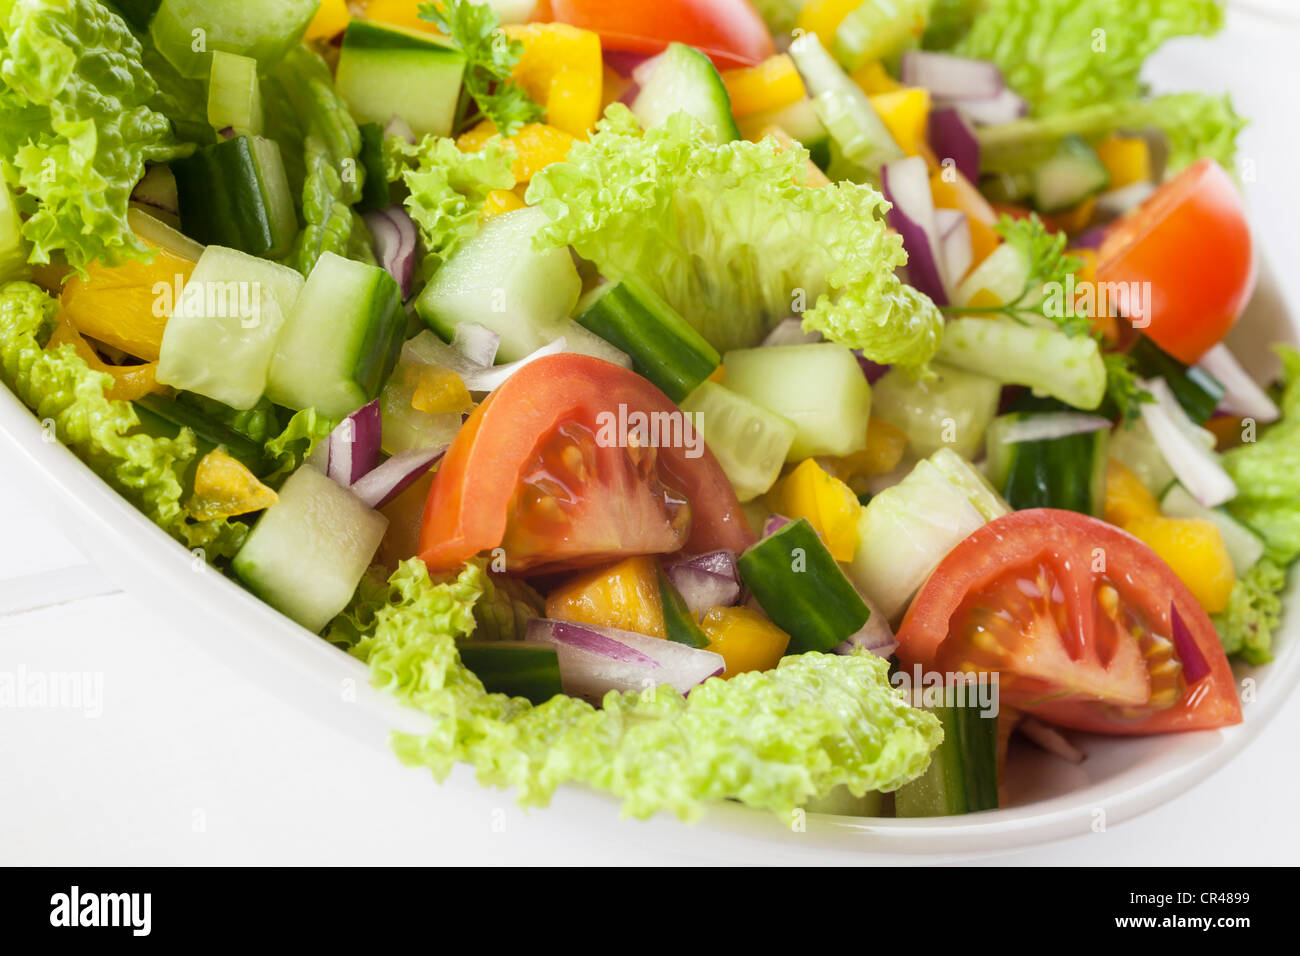 A bowl of fresh mixed salad, with lettuce, cucumber, tomato, red onion, yellow capsicum,celery, parsley. Stock Photo